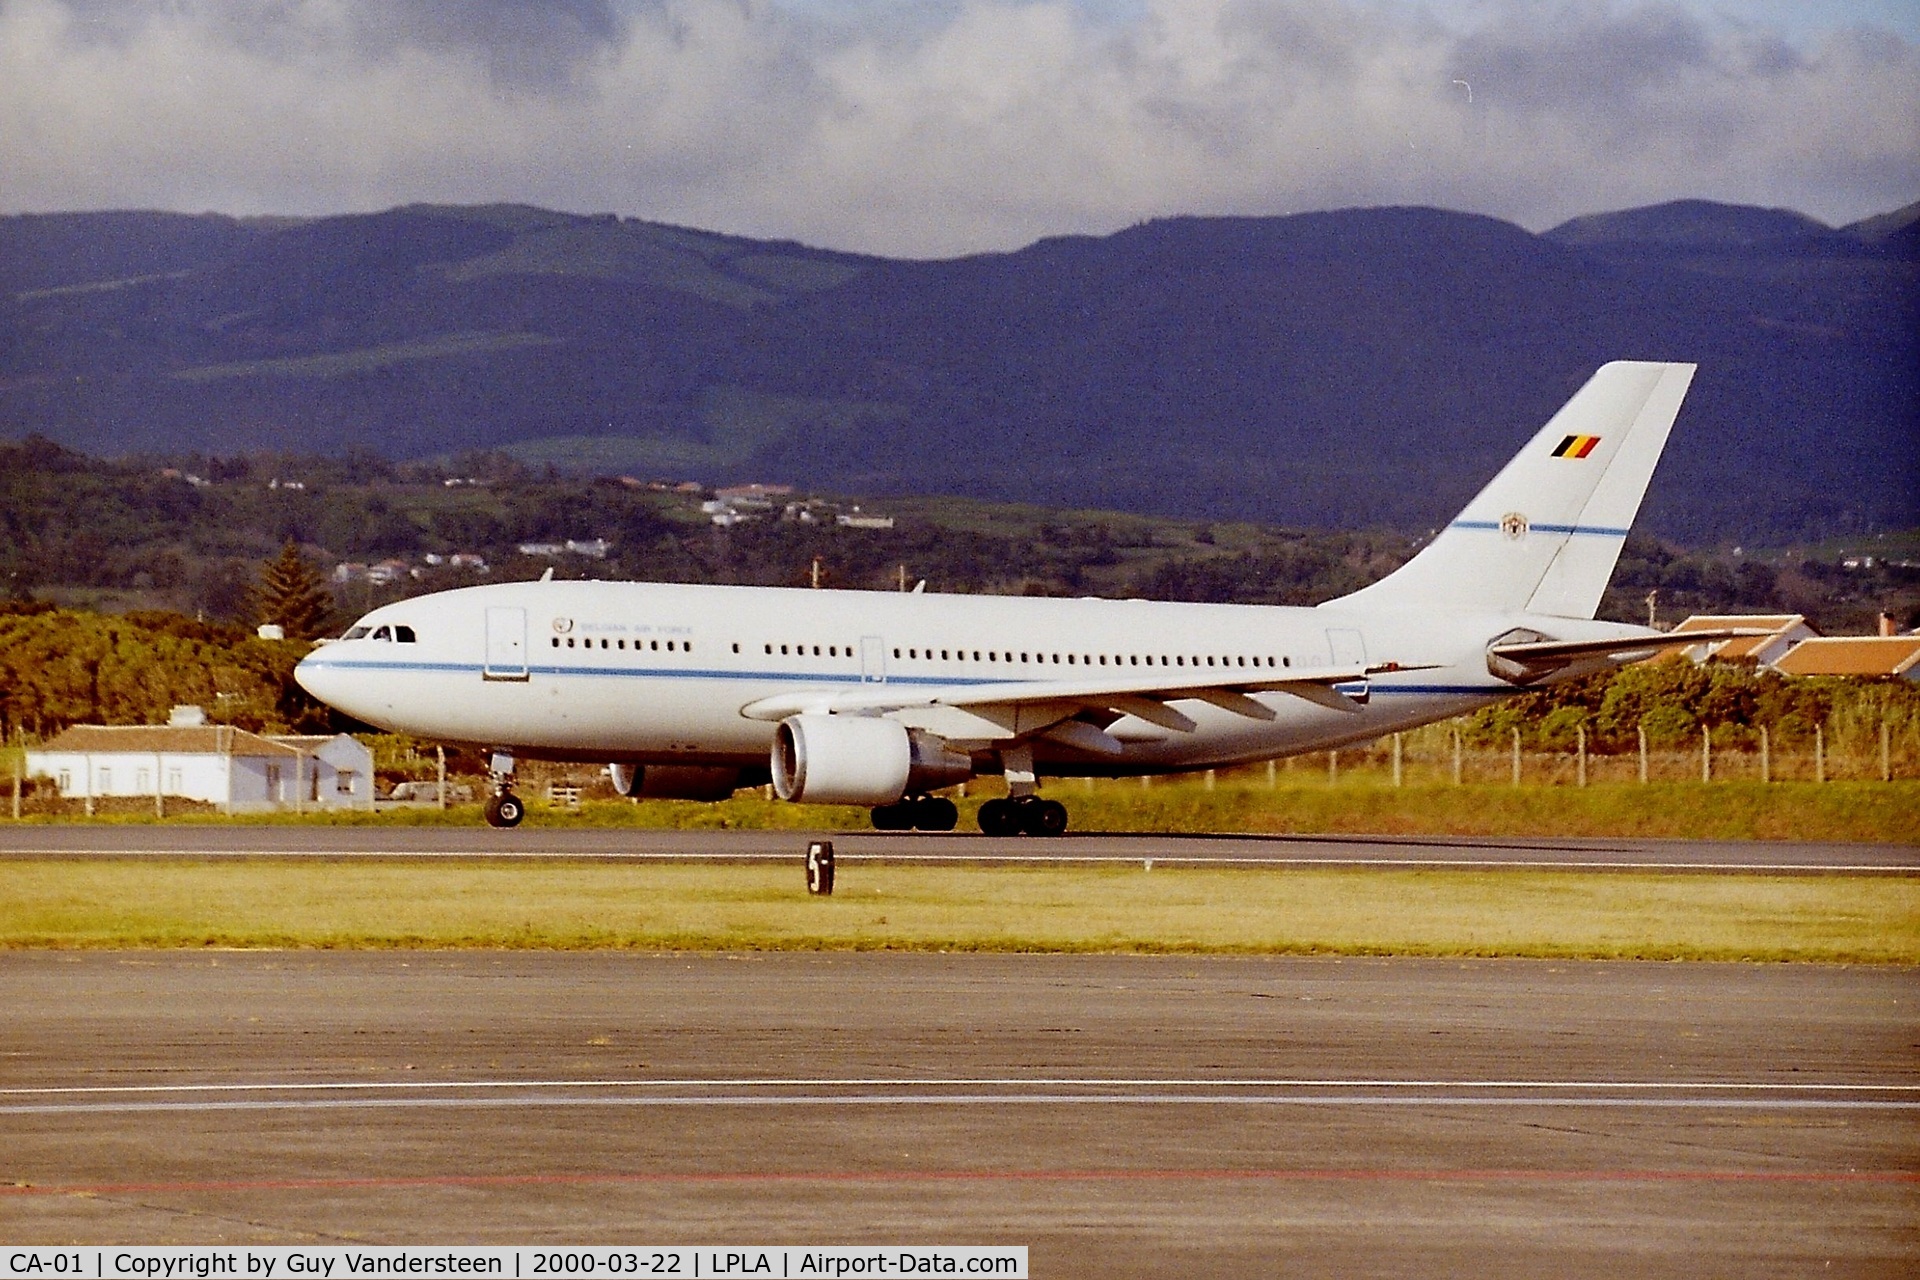 CA-01, 1985 Airbus A310-222 C/N 372, BAF A-310 CA-01 en route to Red Flag 2000-3 via Lajes Airfield, Azores